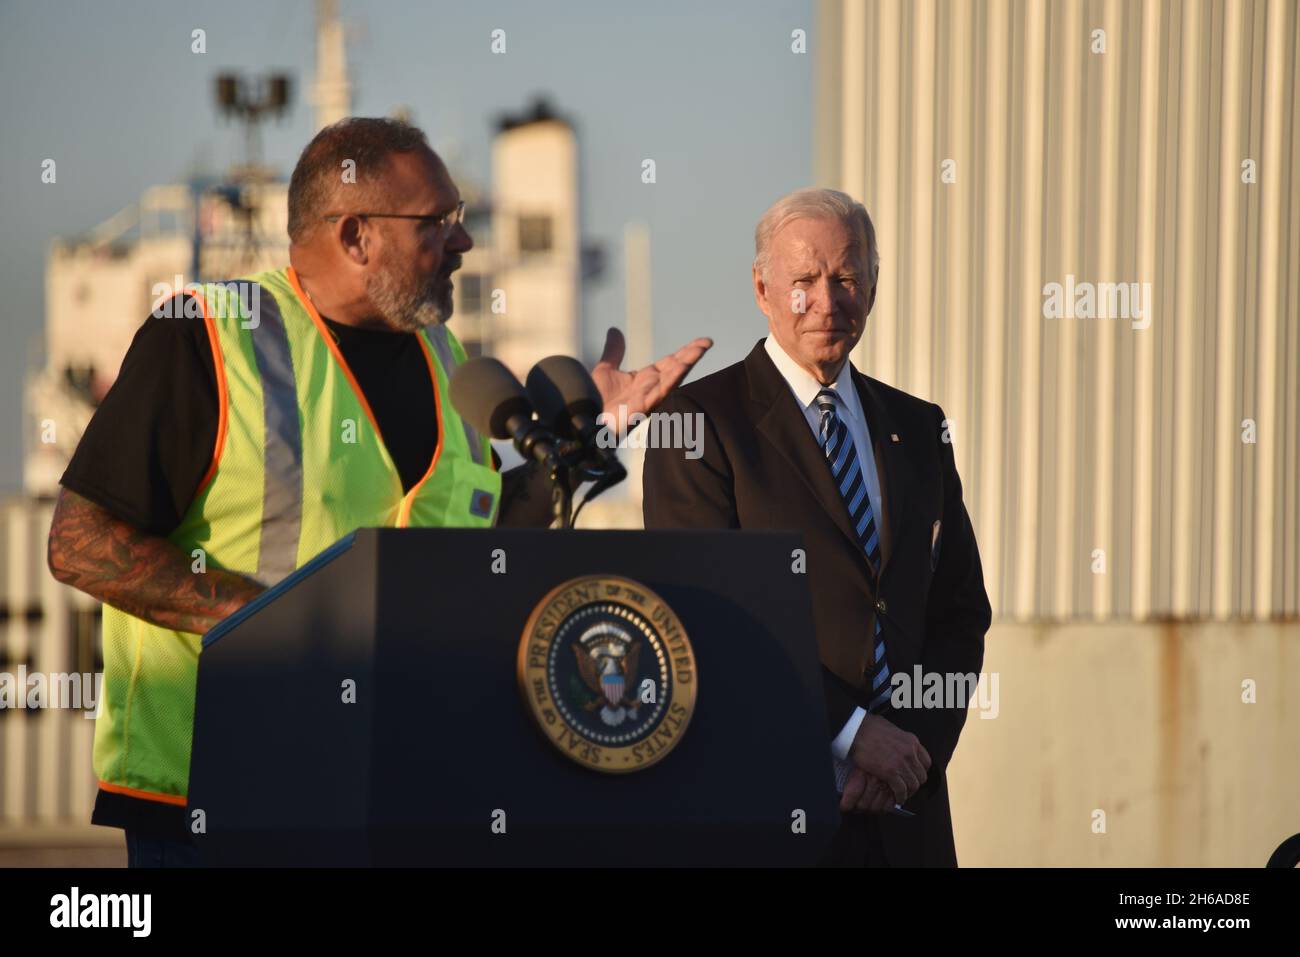 Baltimore, United States. 10 November, 2021. Longshoreman Tony Revels introduces President Joe Biden during a visit to the Port of Baltimore, November 10, 2021 in Baltimore, Maryland.  Credit: Joe Andrucyk/Maryland Governors Office/Alamy Live News Stock Photo